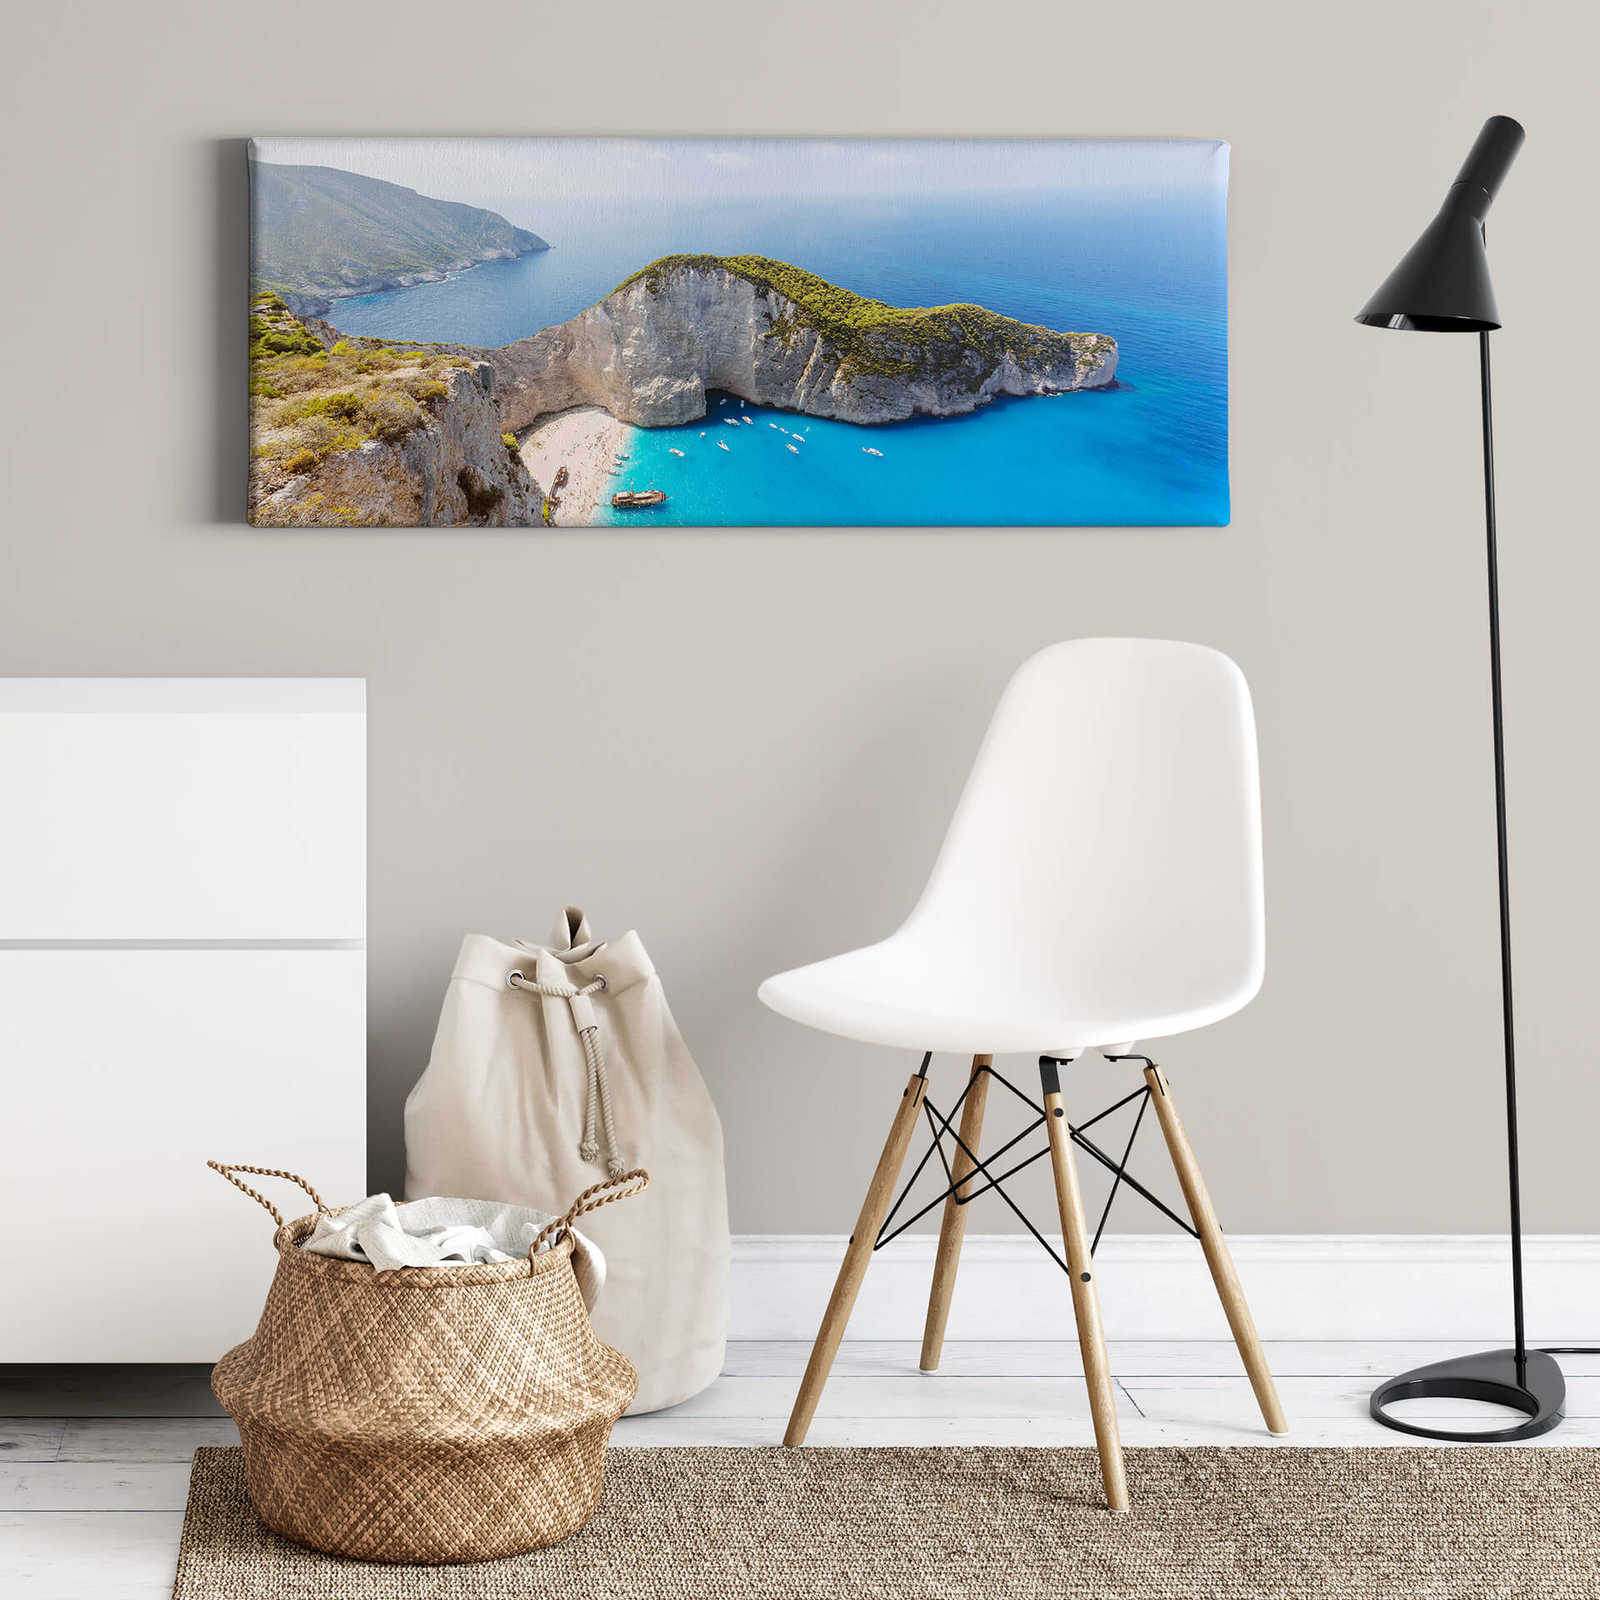             Panorama canvas print beach motif in blue and green
        